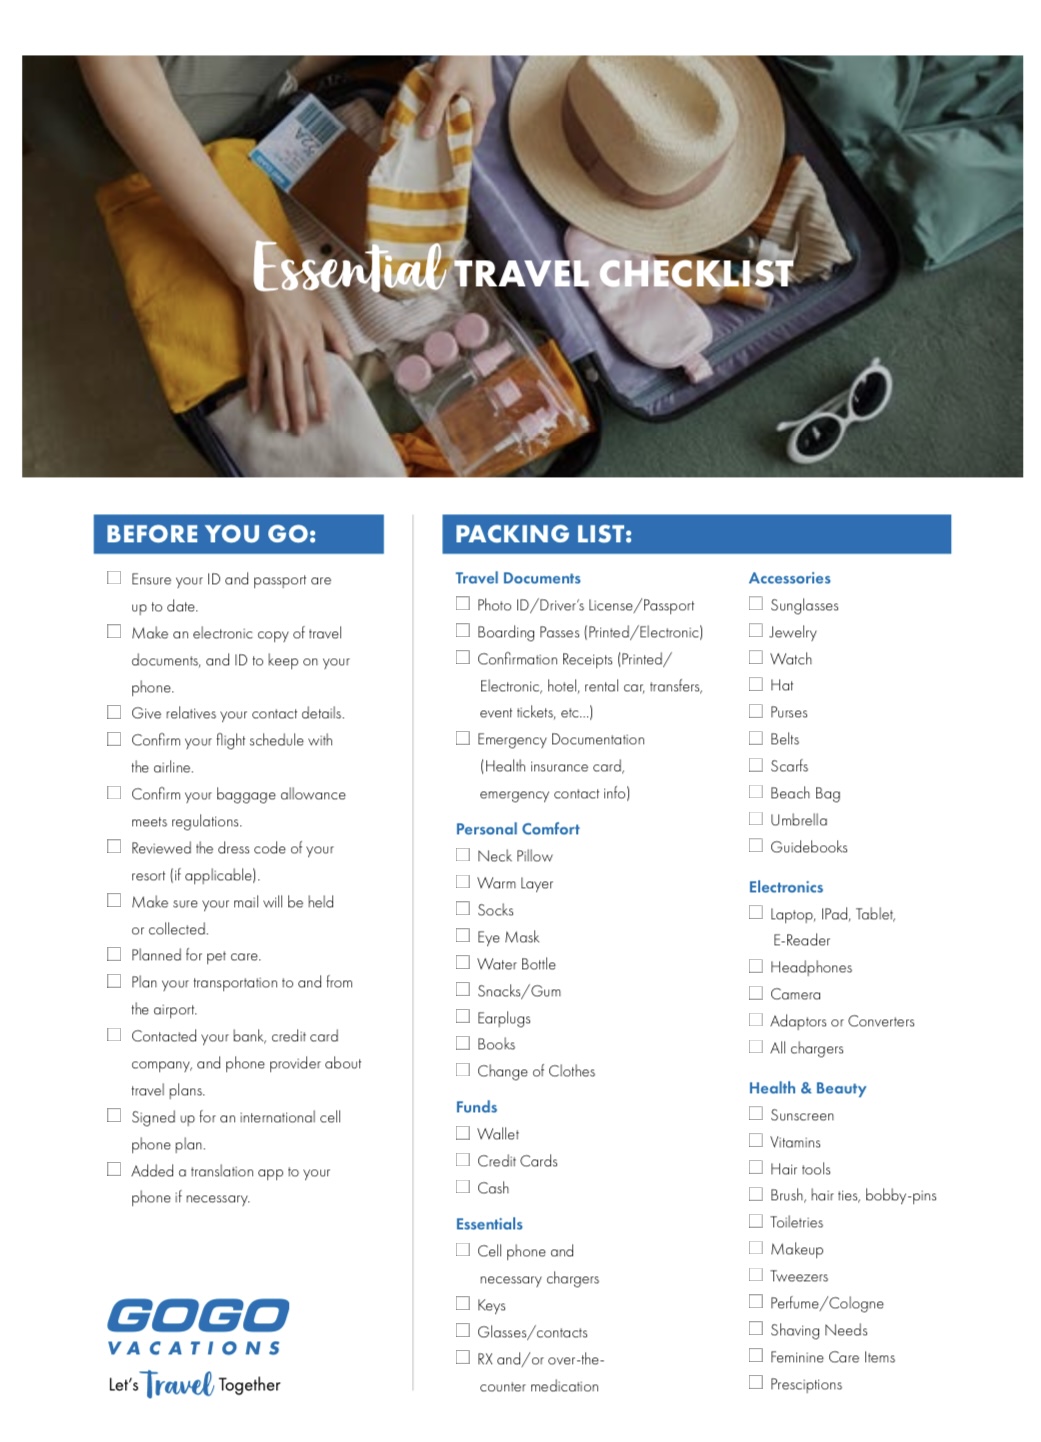 The Complete Travel & Packing Checklist